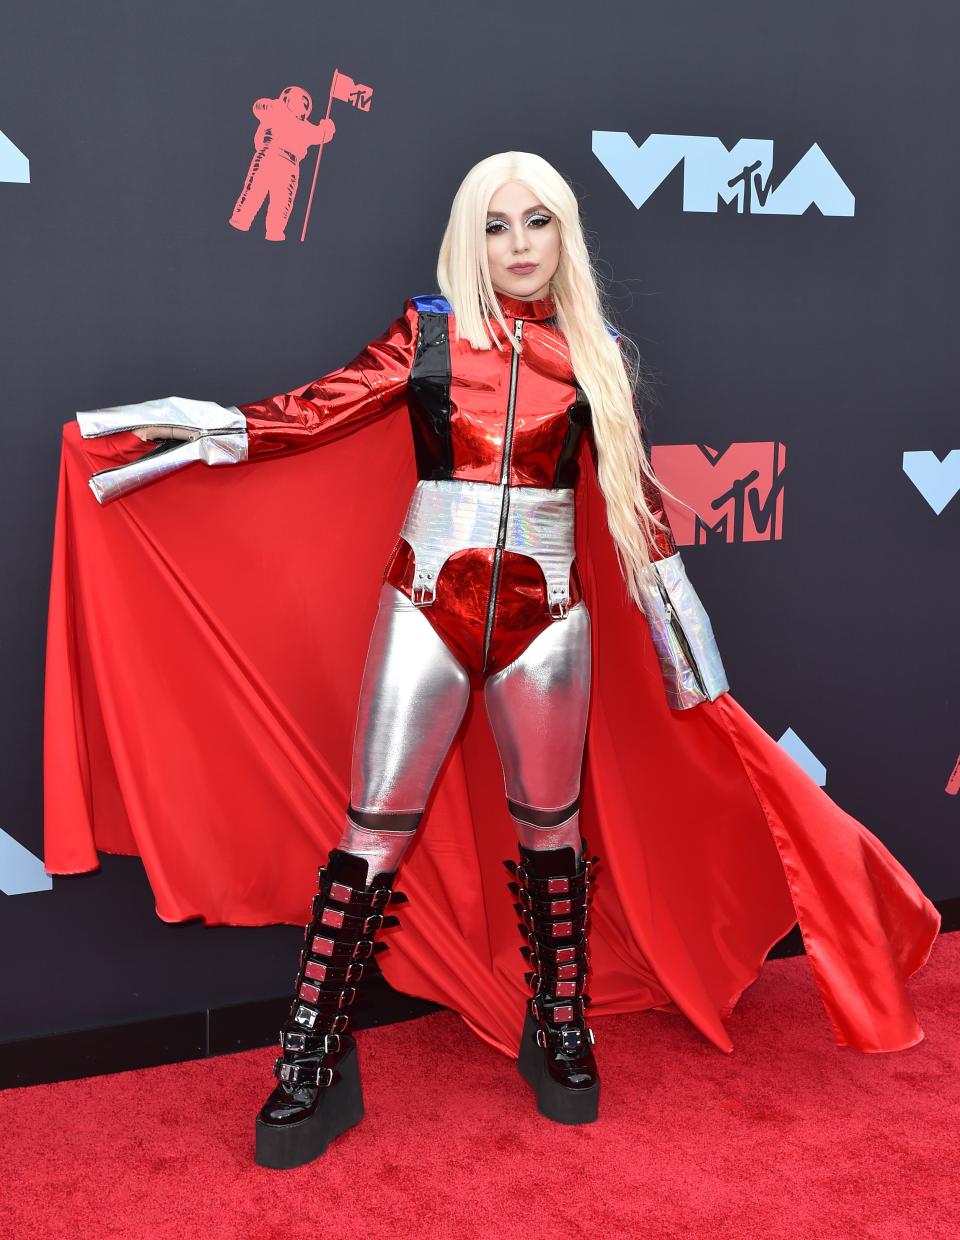 Ava Max at the 2019 MTV Video Music Awards in Newark, New Jersey.